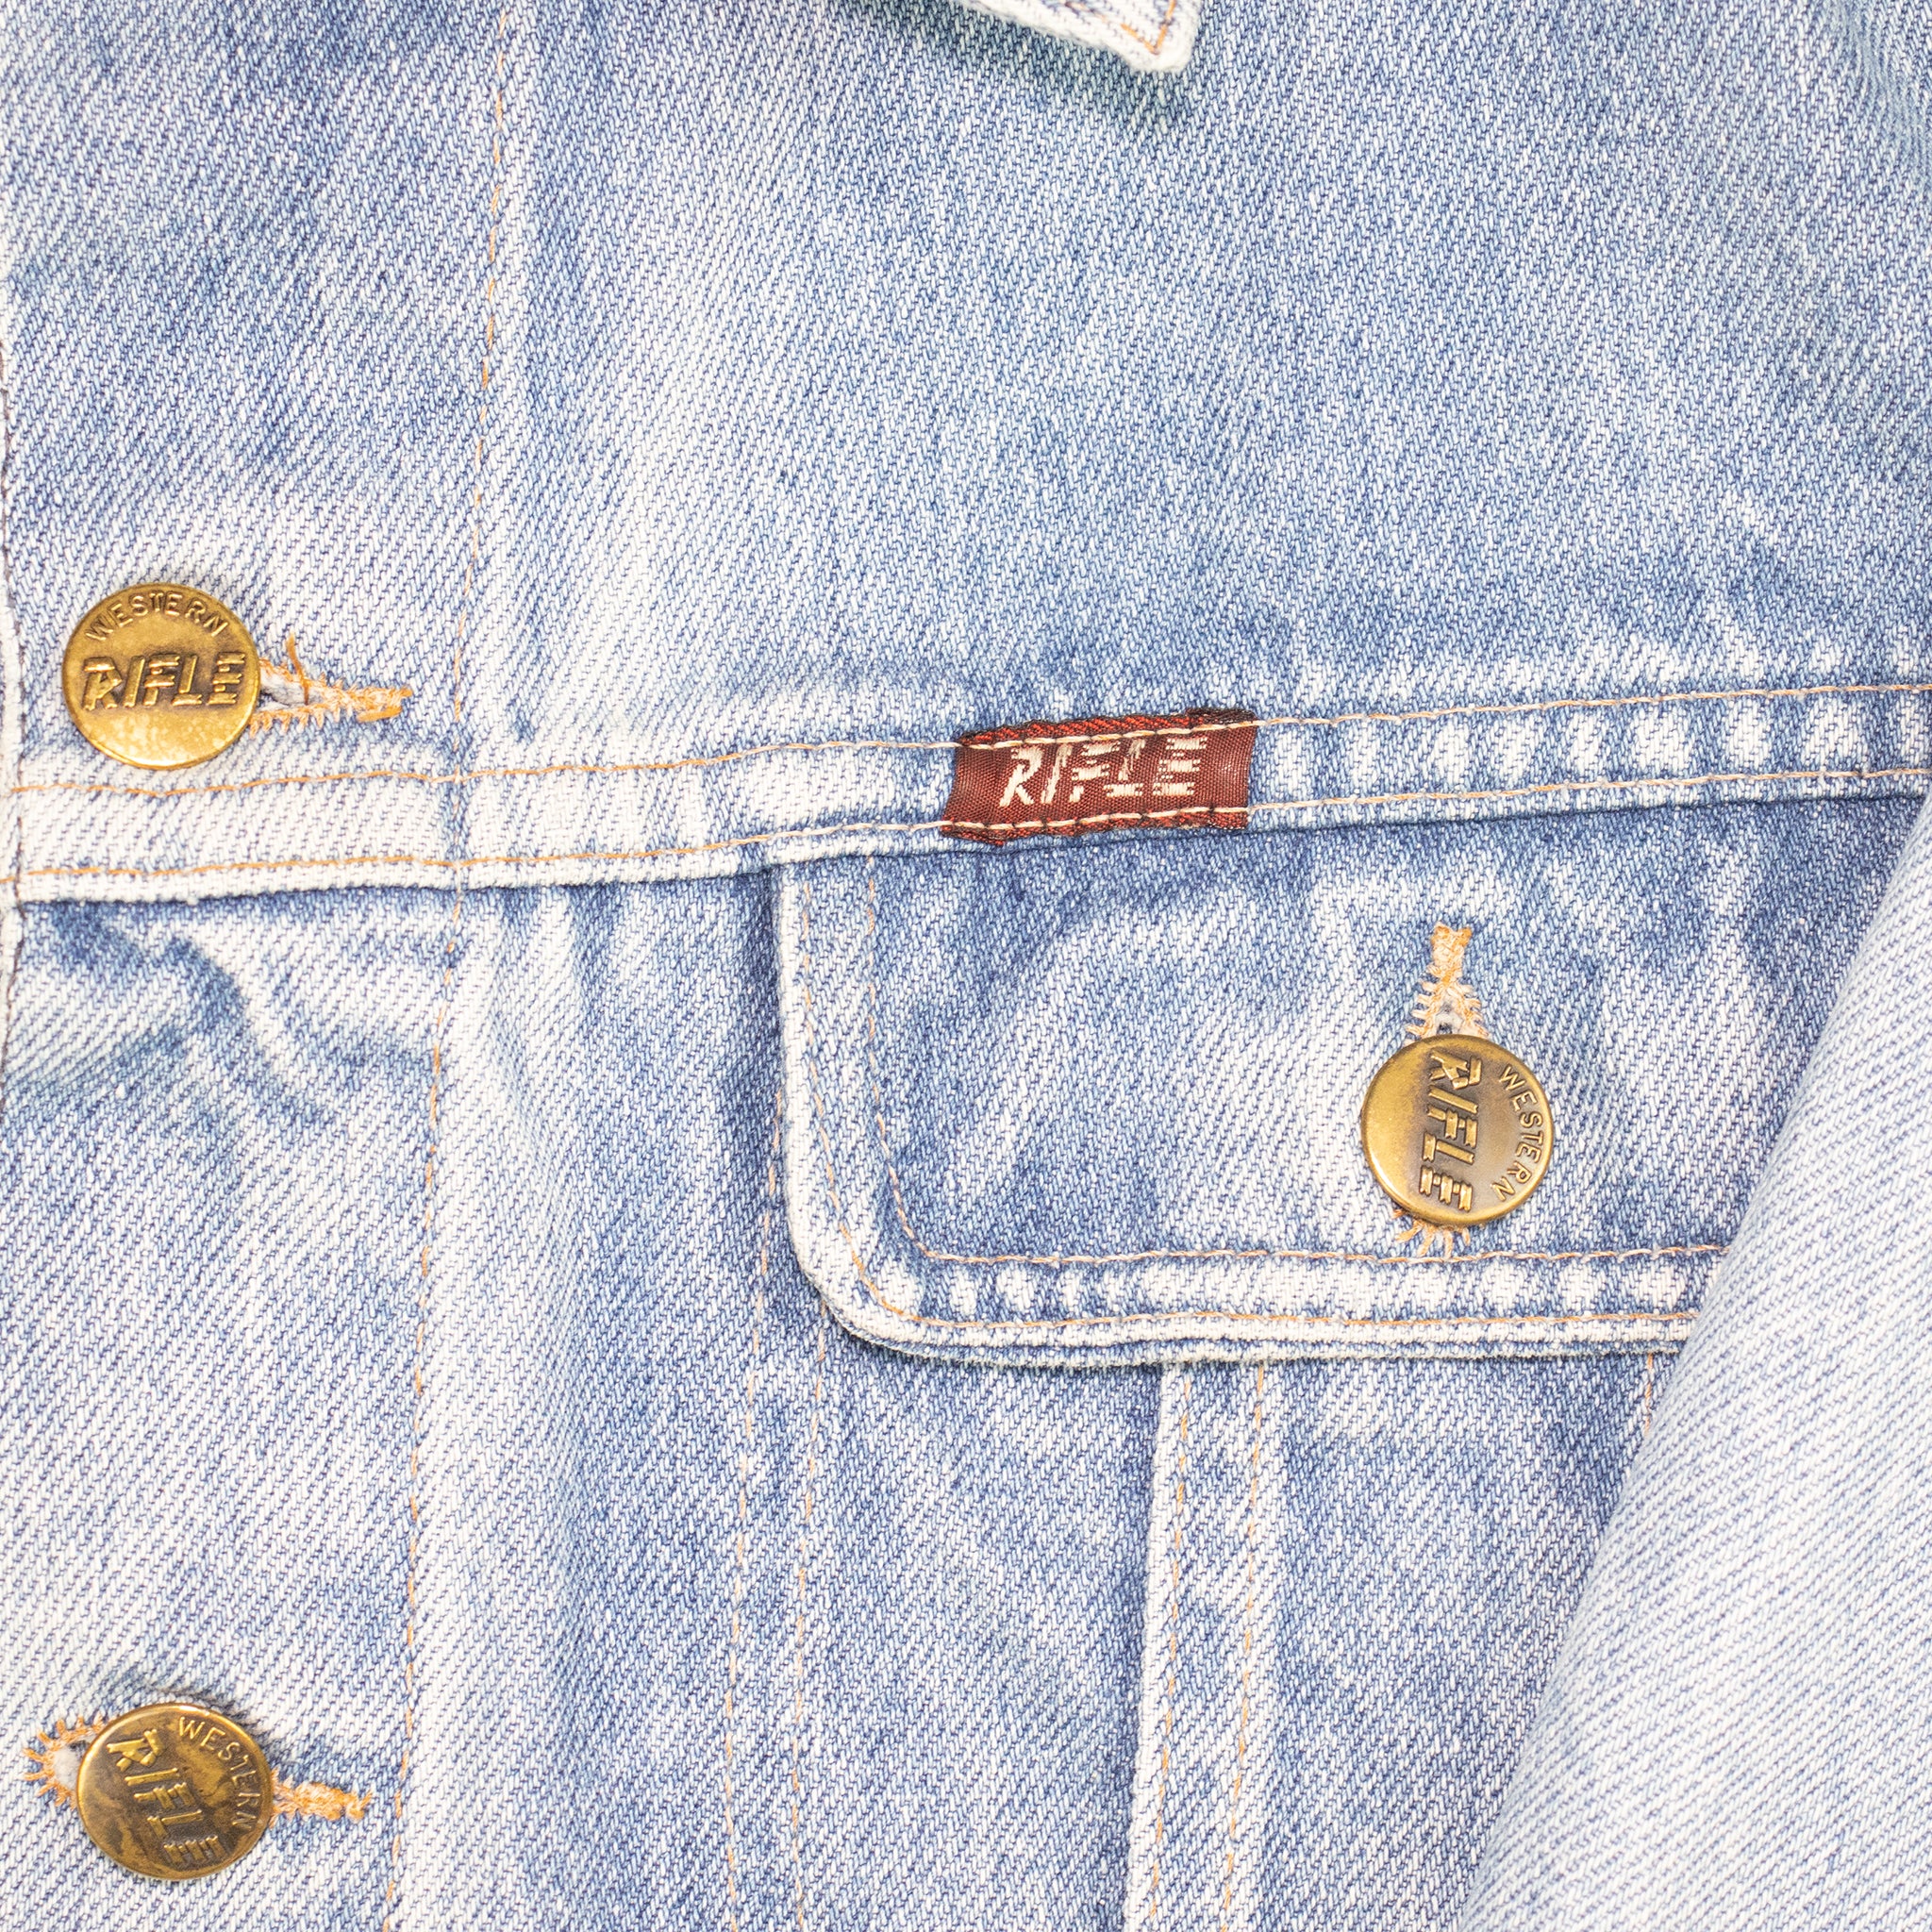 rifle jeans online store